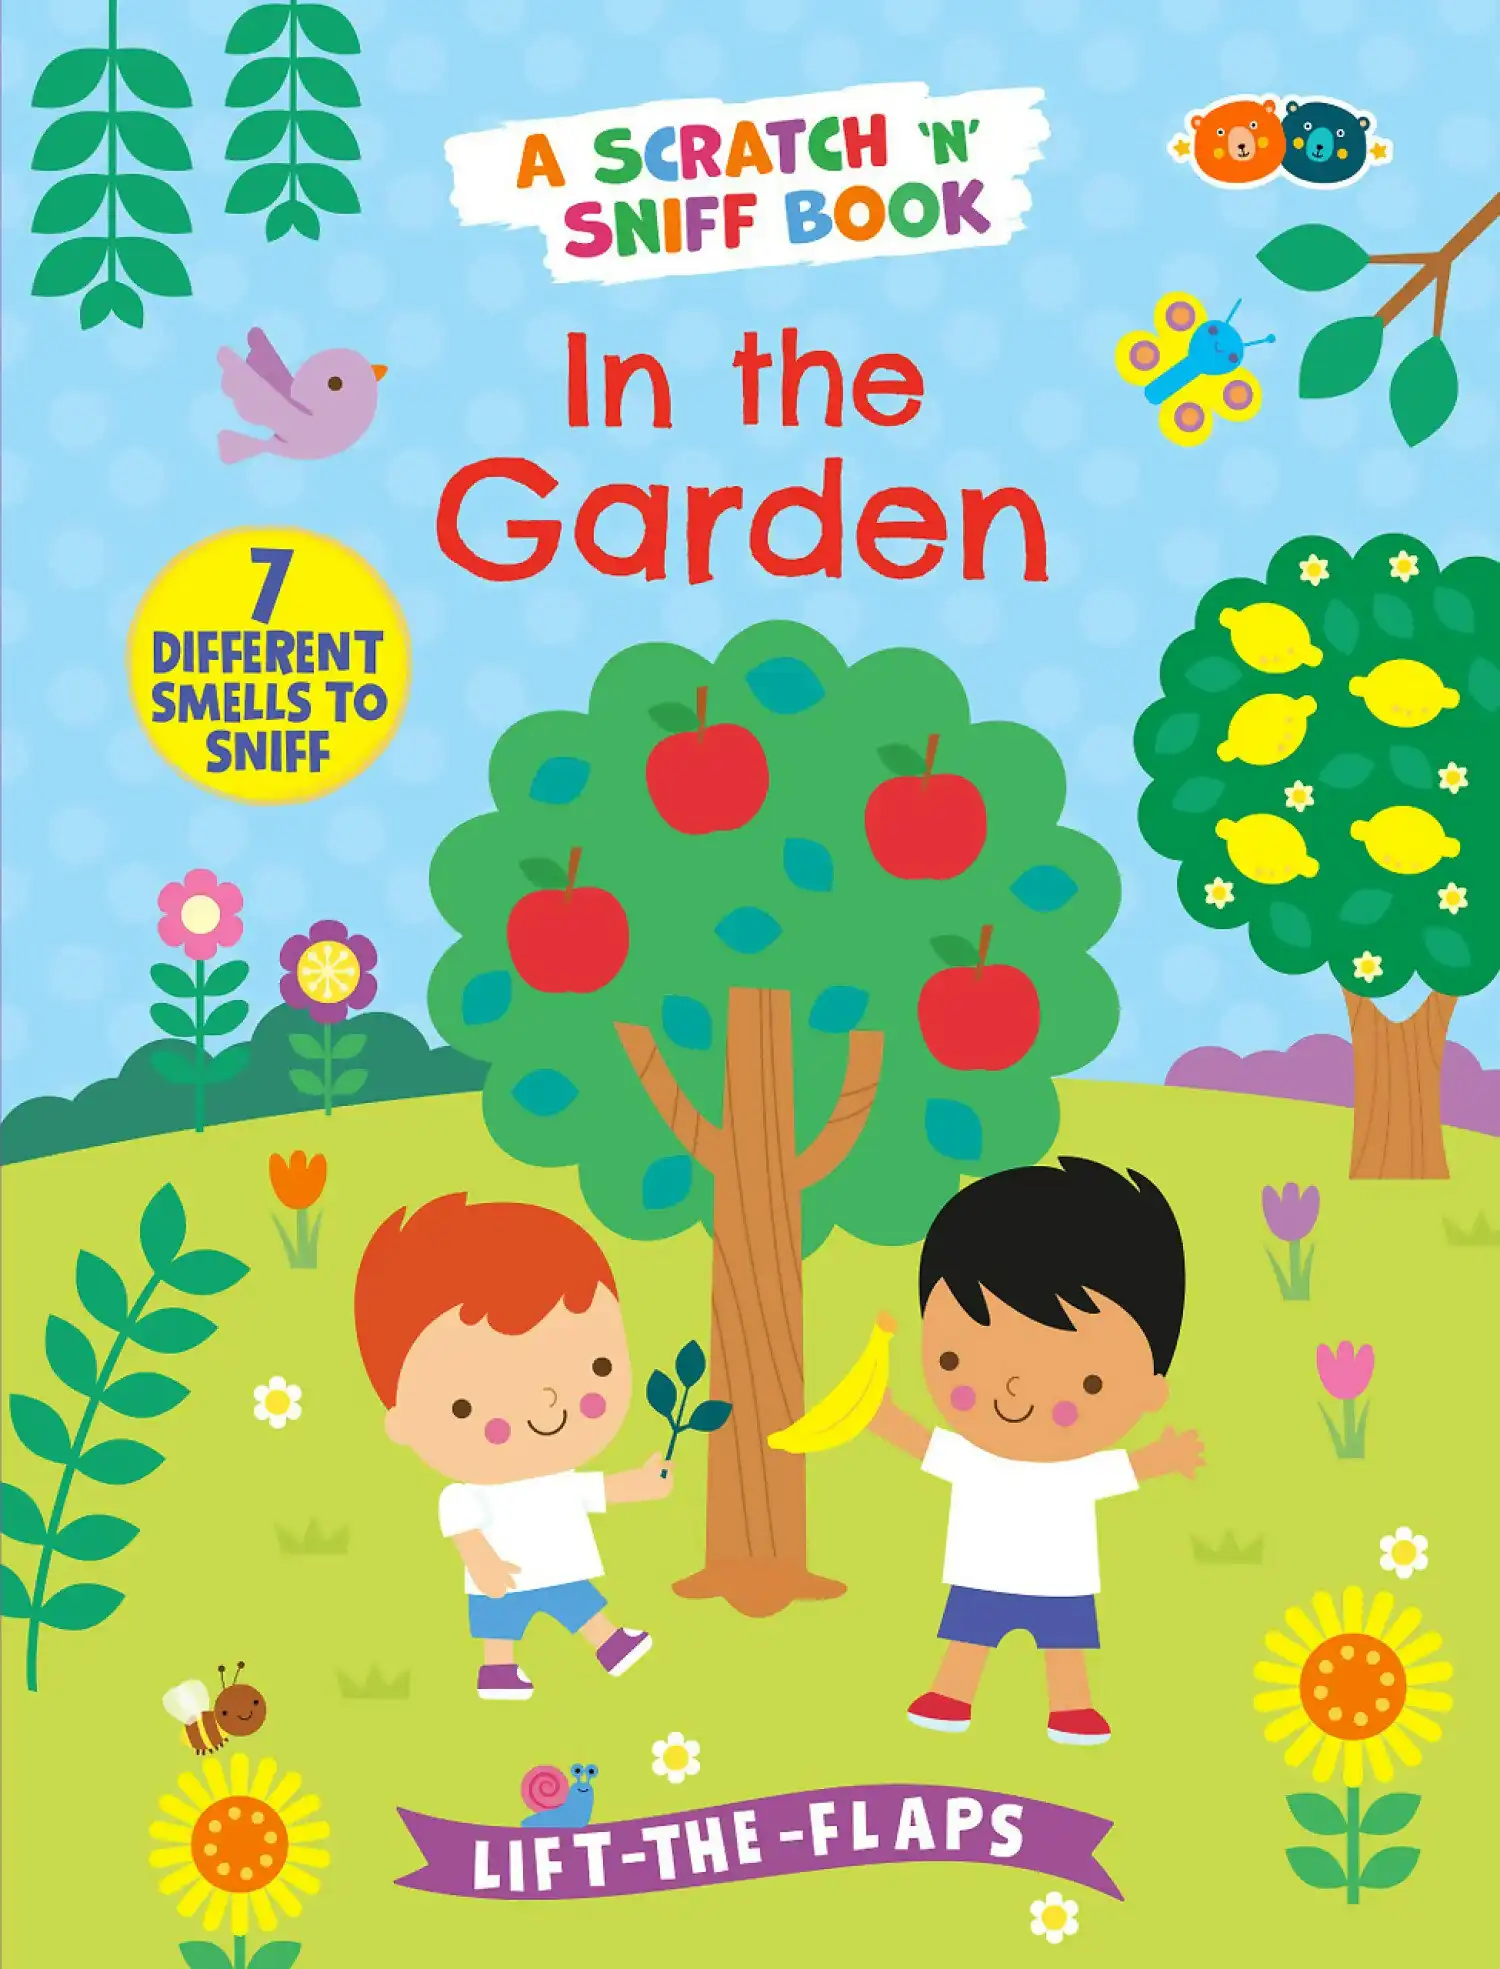 Buddy & Barney - Scratch & Sniff Smell Book - In The Garden